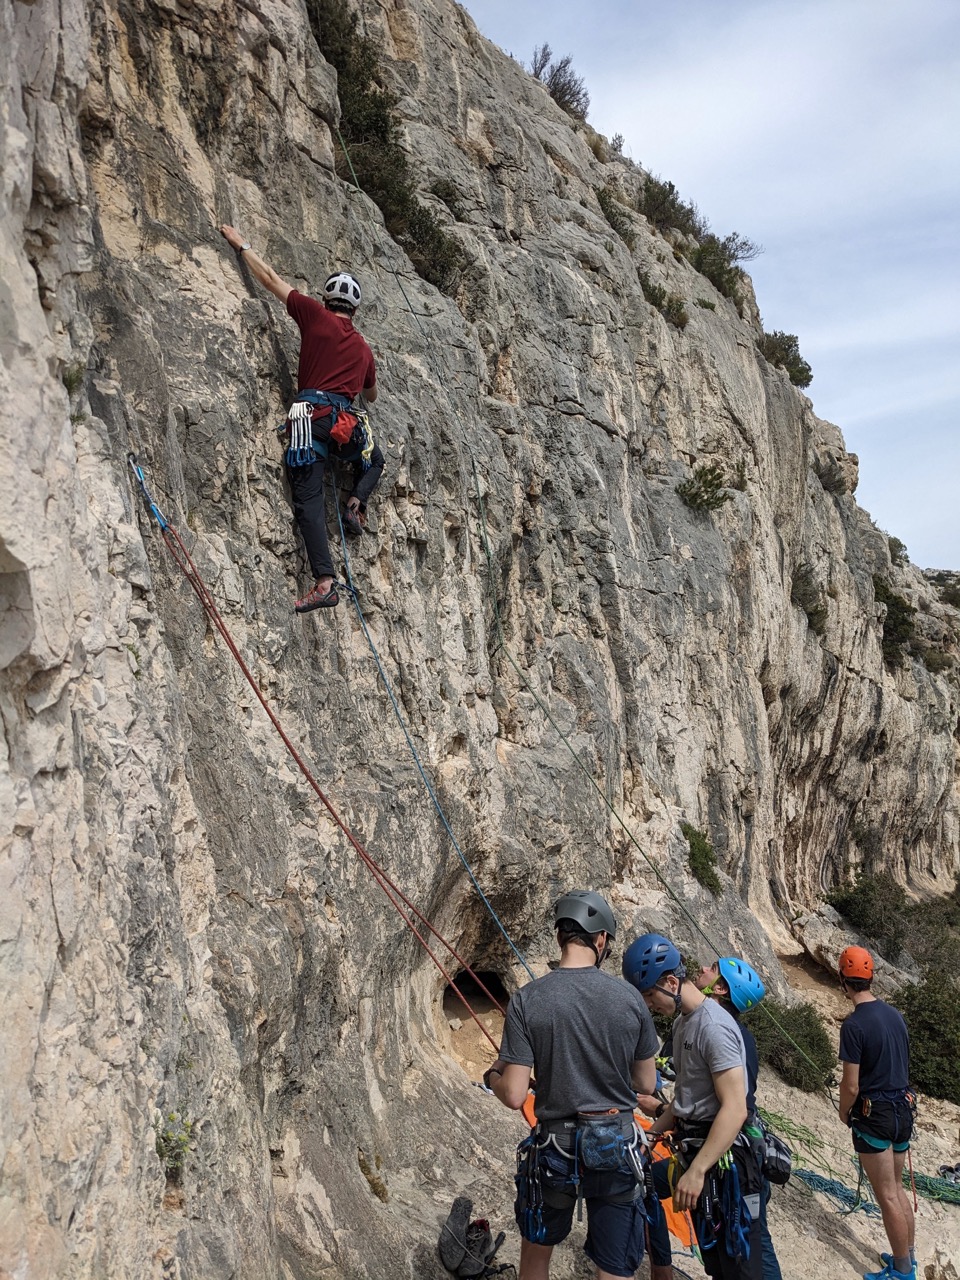 Excitedly getting up our first route of the trip, La Baleine. (Photo: Sam Bailey)